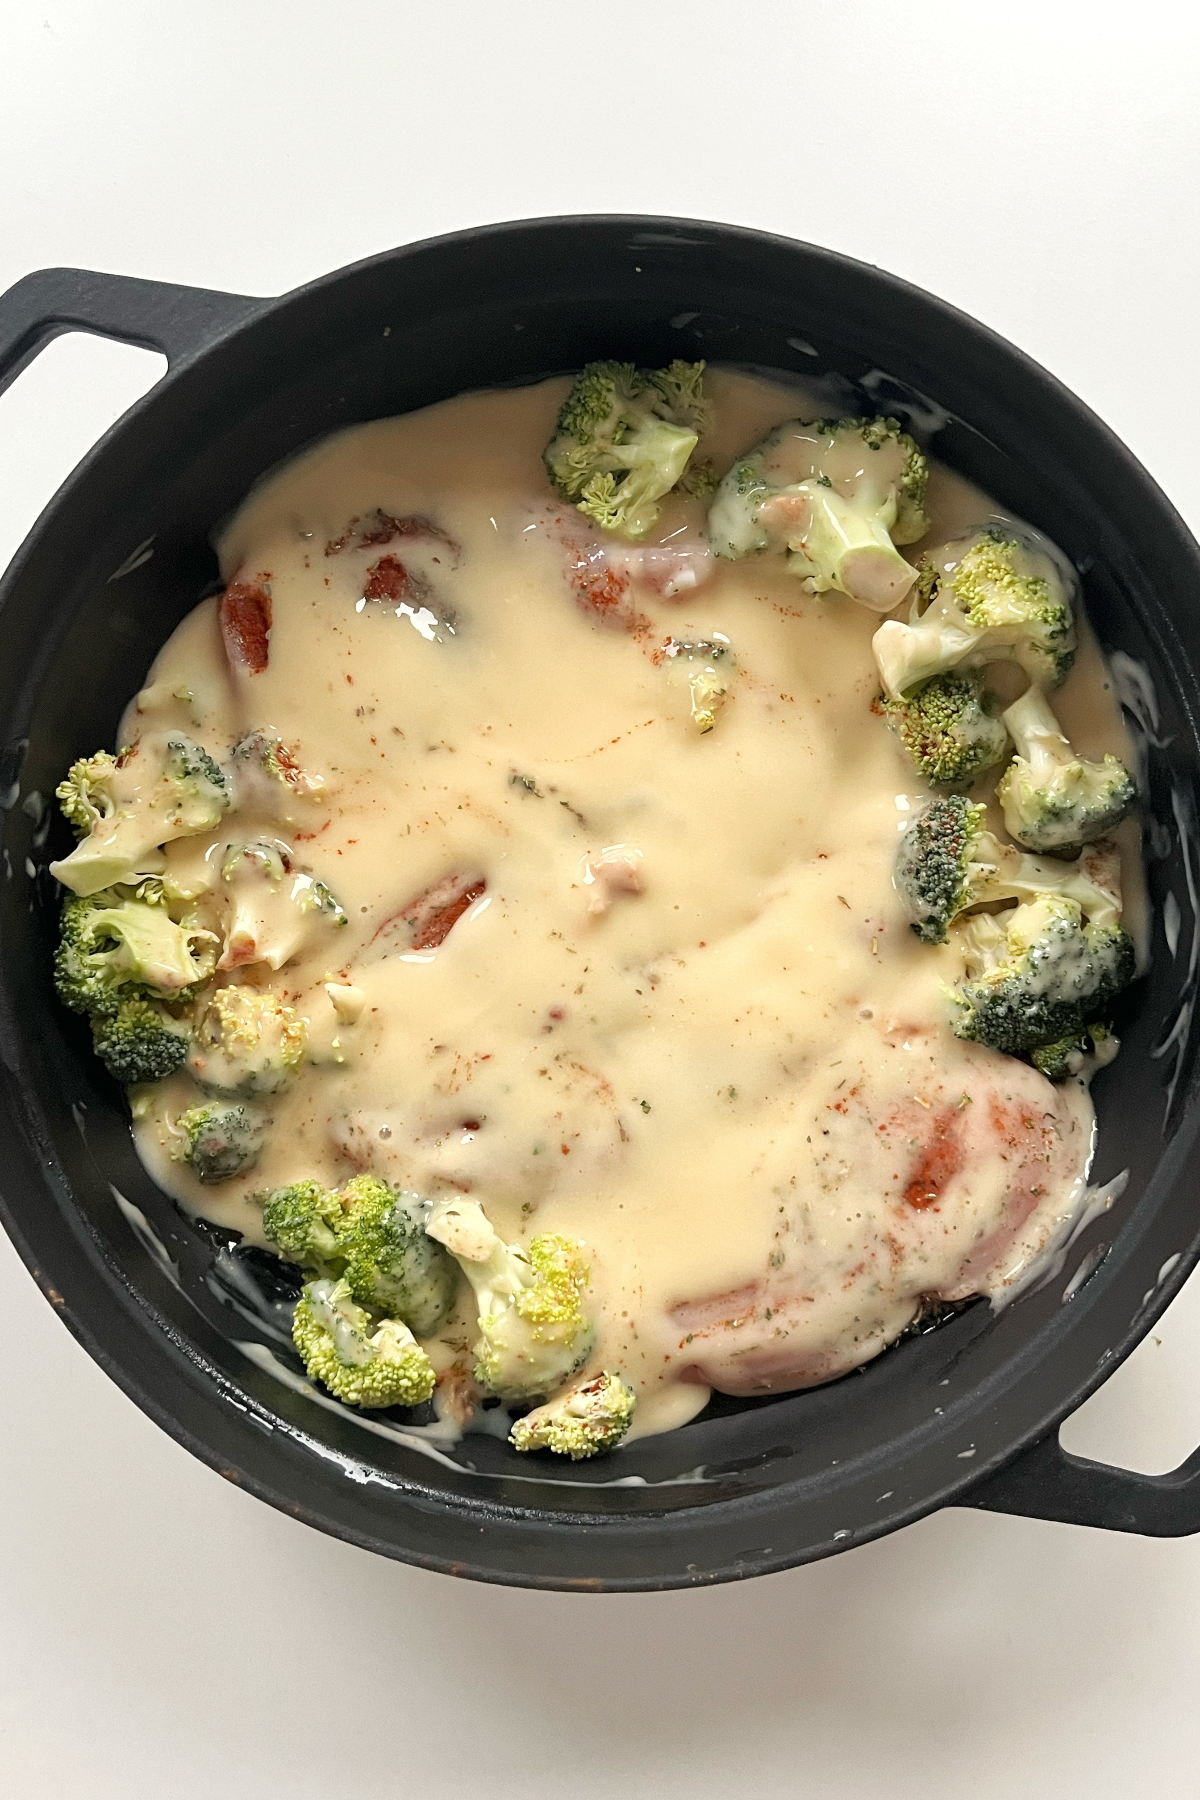 Black pan filled with chicken breast, broccoli, cream of chicken soup.